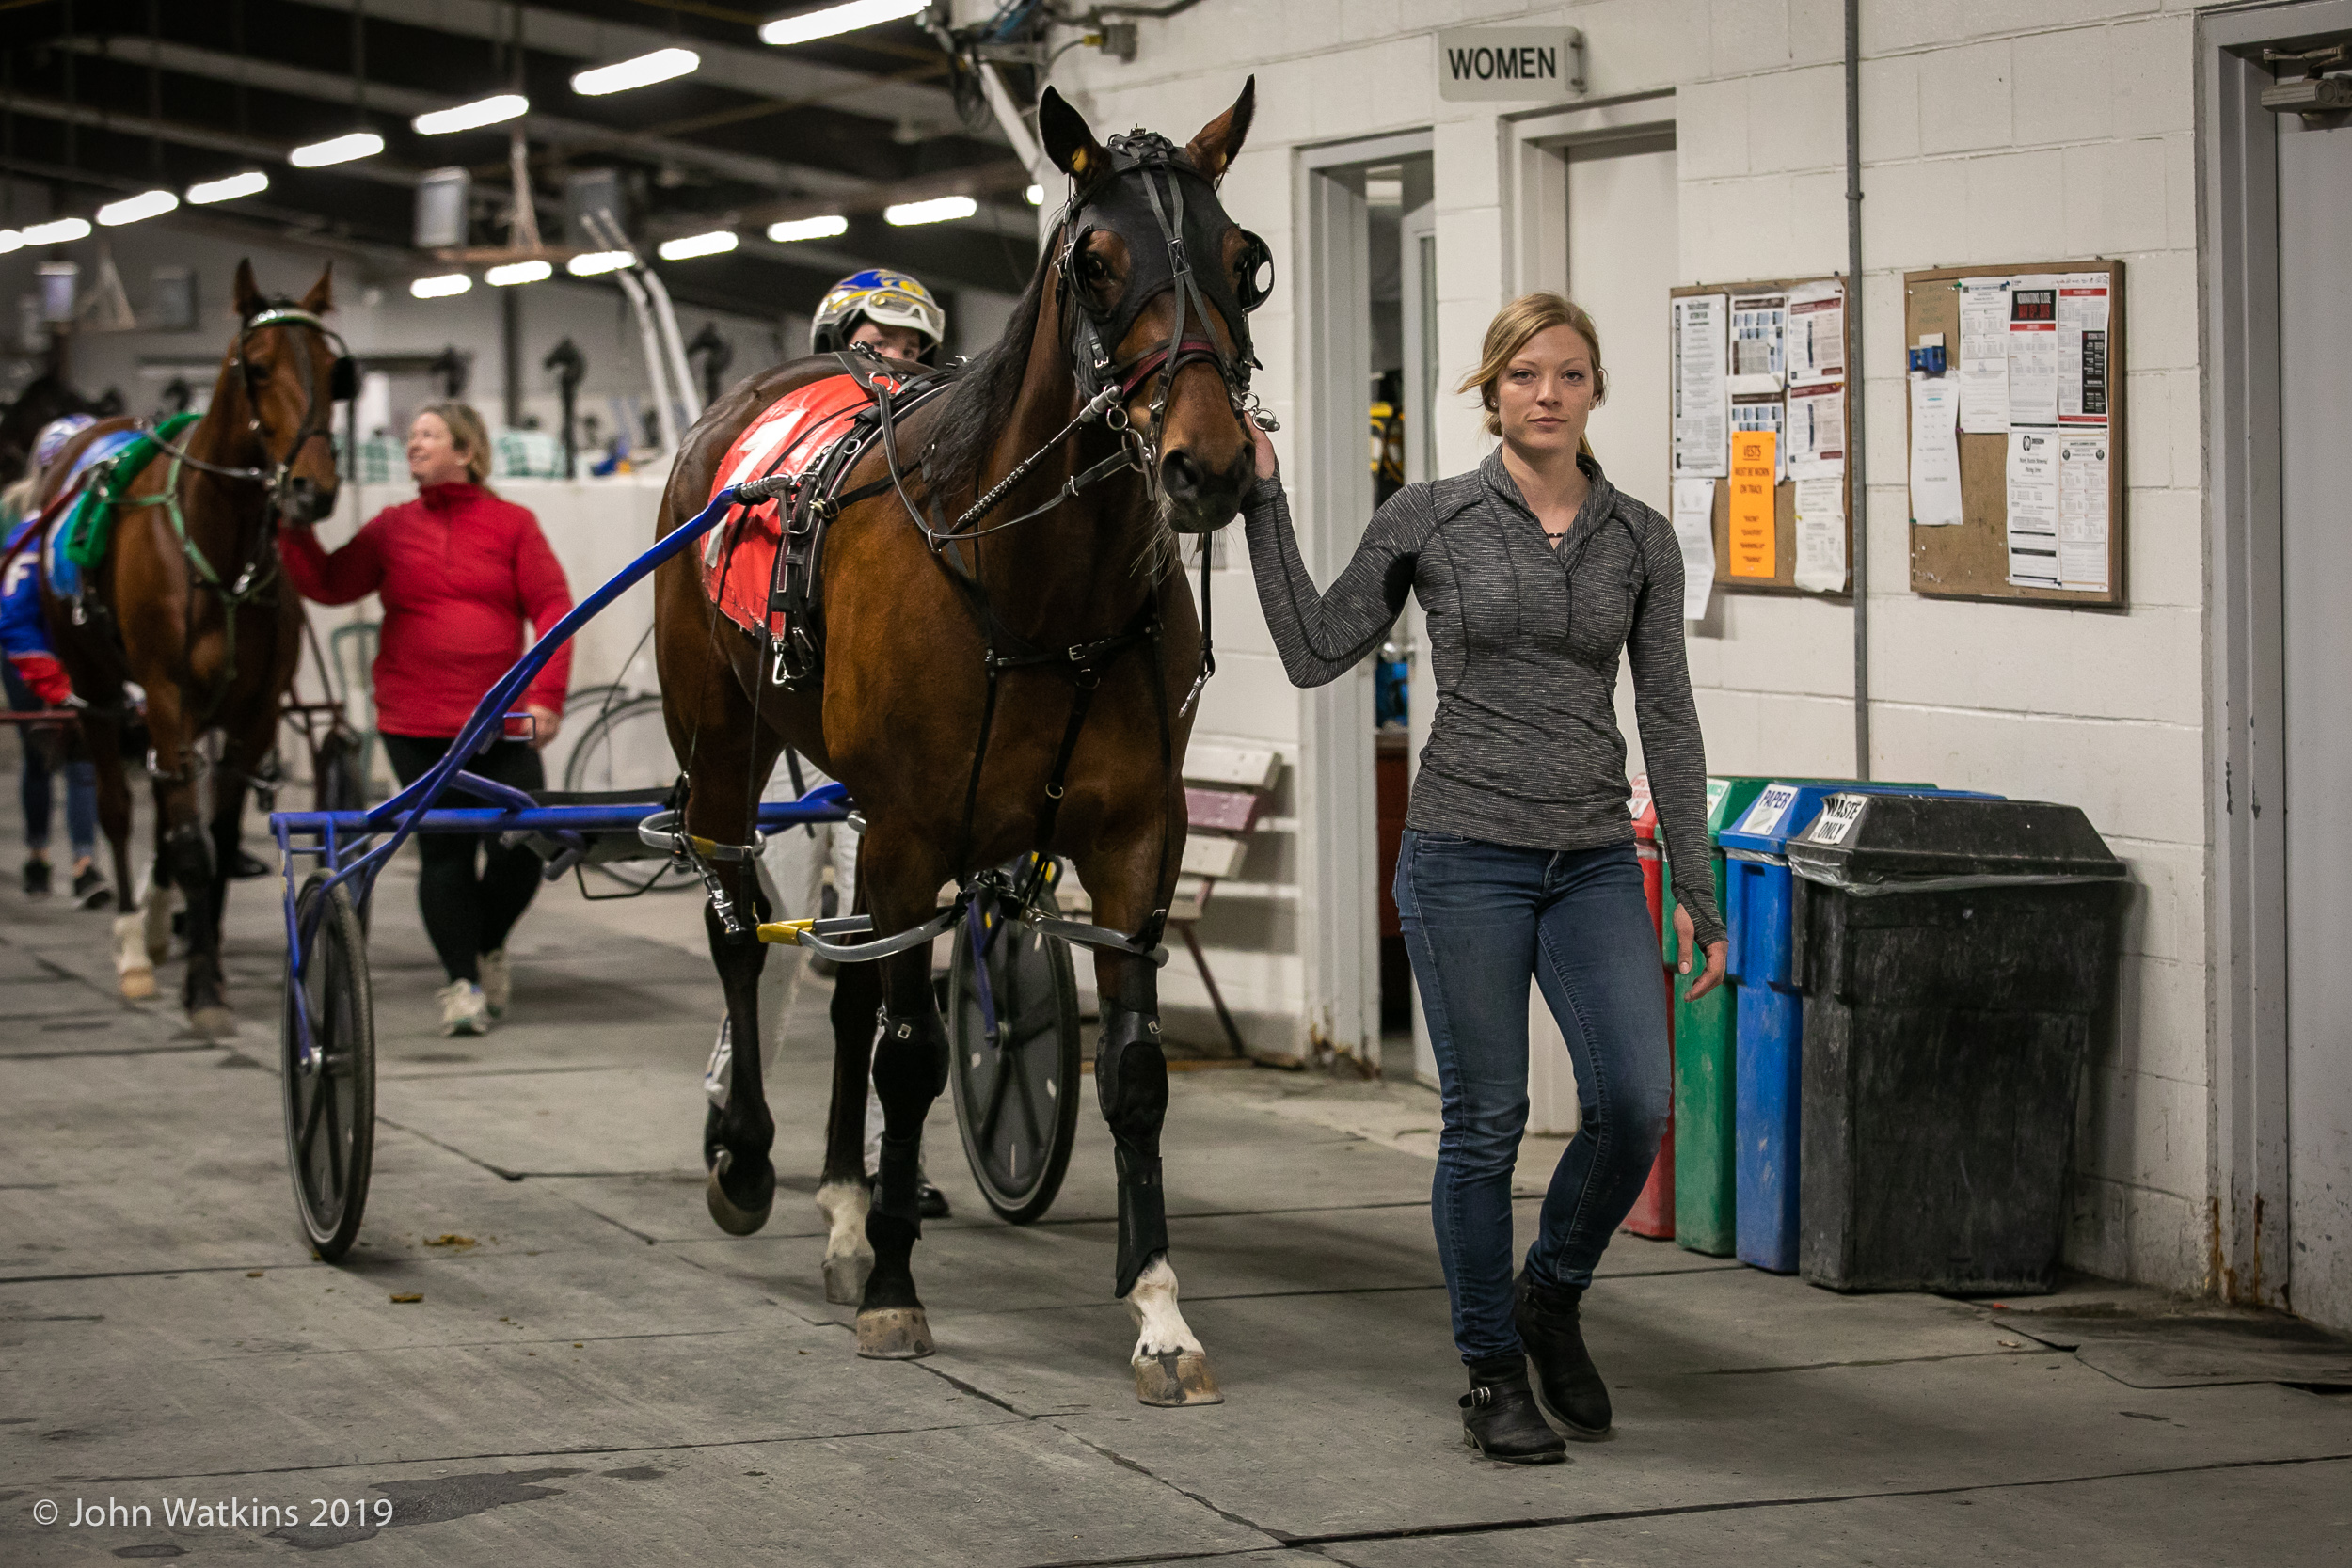 Michelle Olson: An iron-willed love of horses, horse racing